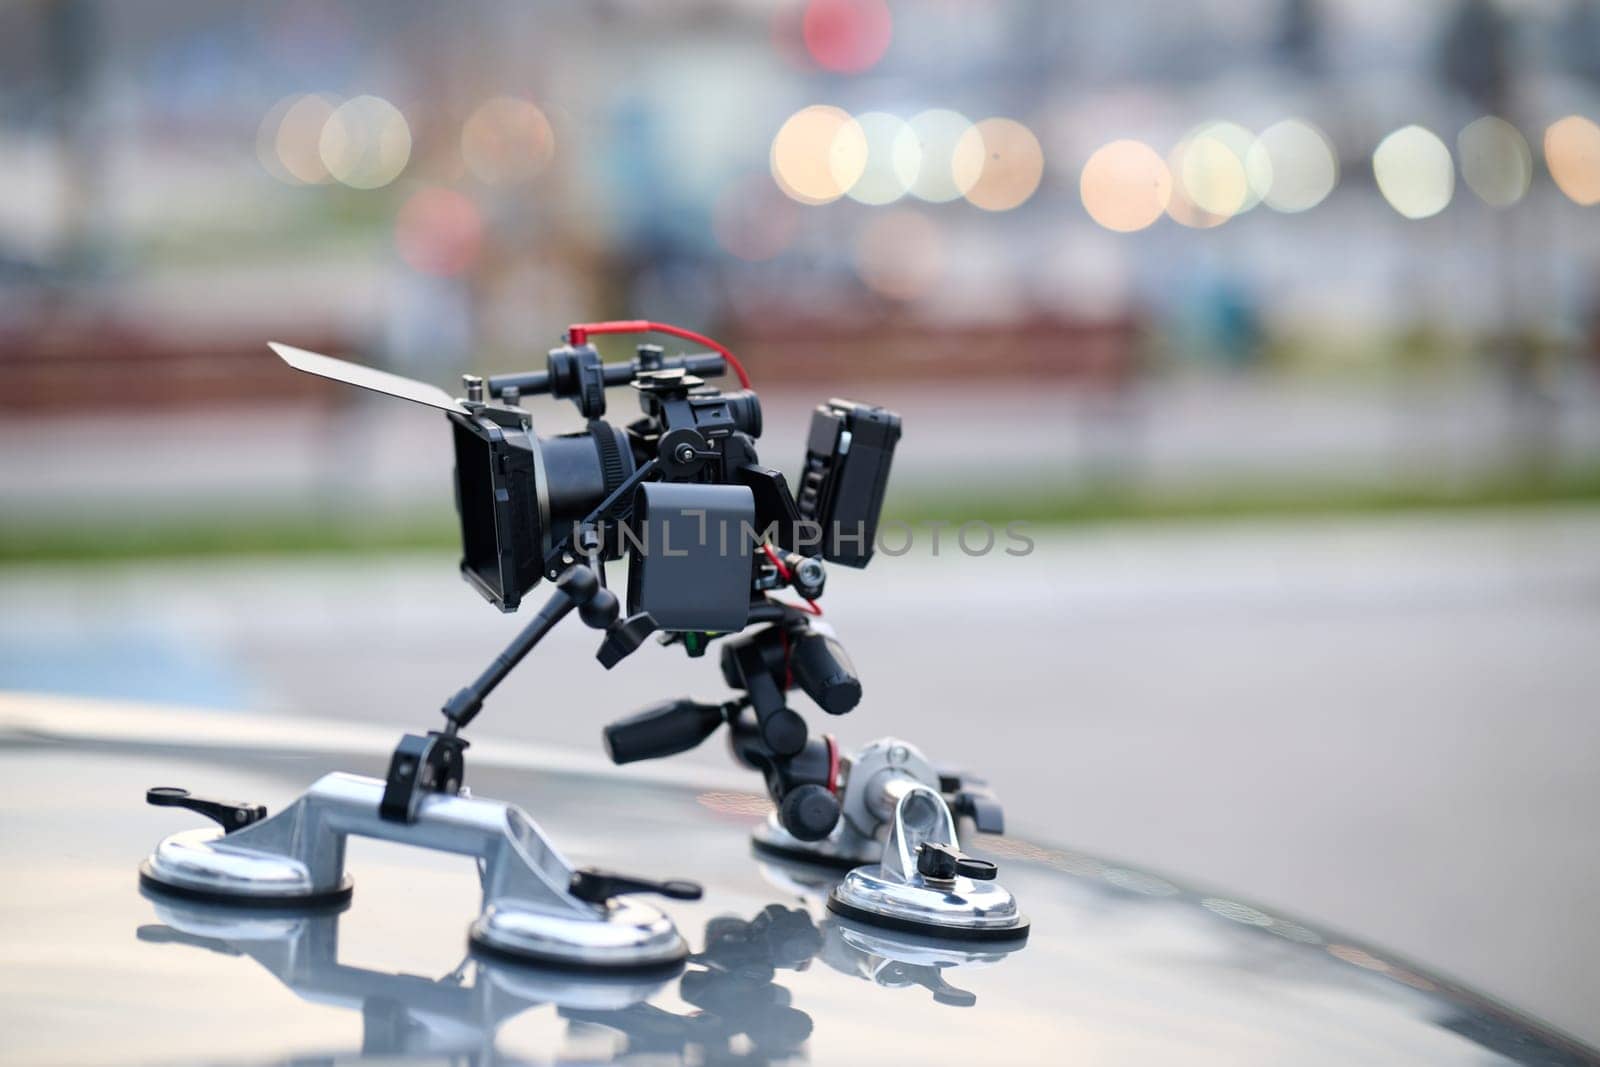 A professional camera rig is mounted on a vehicle, ready for filming cinematic projects and advertisements on the go.